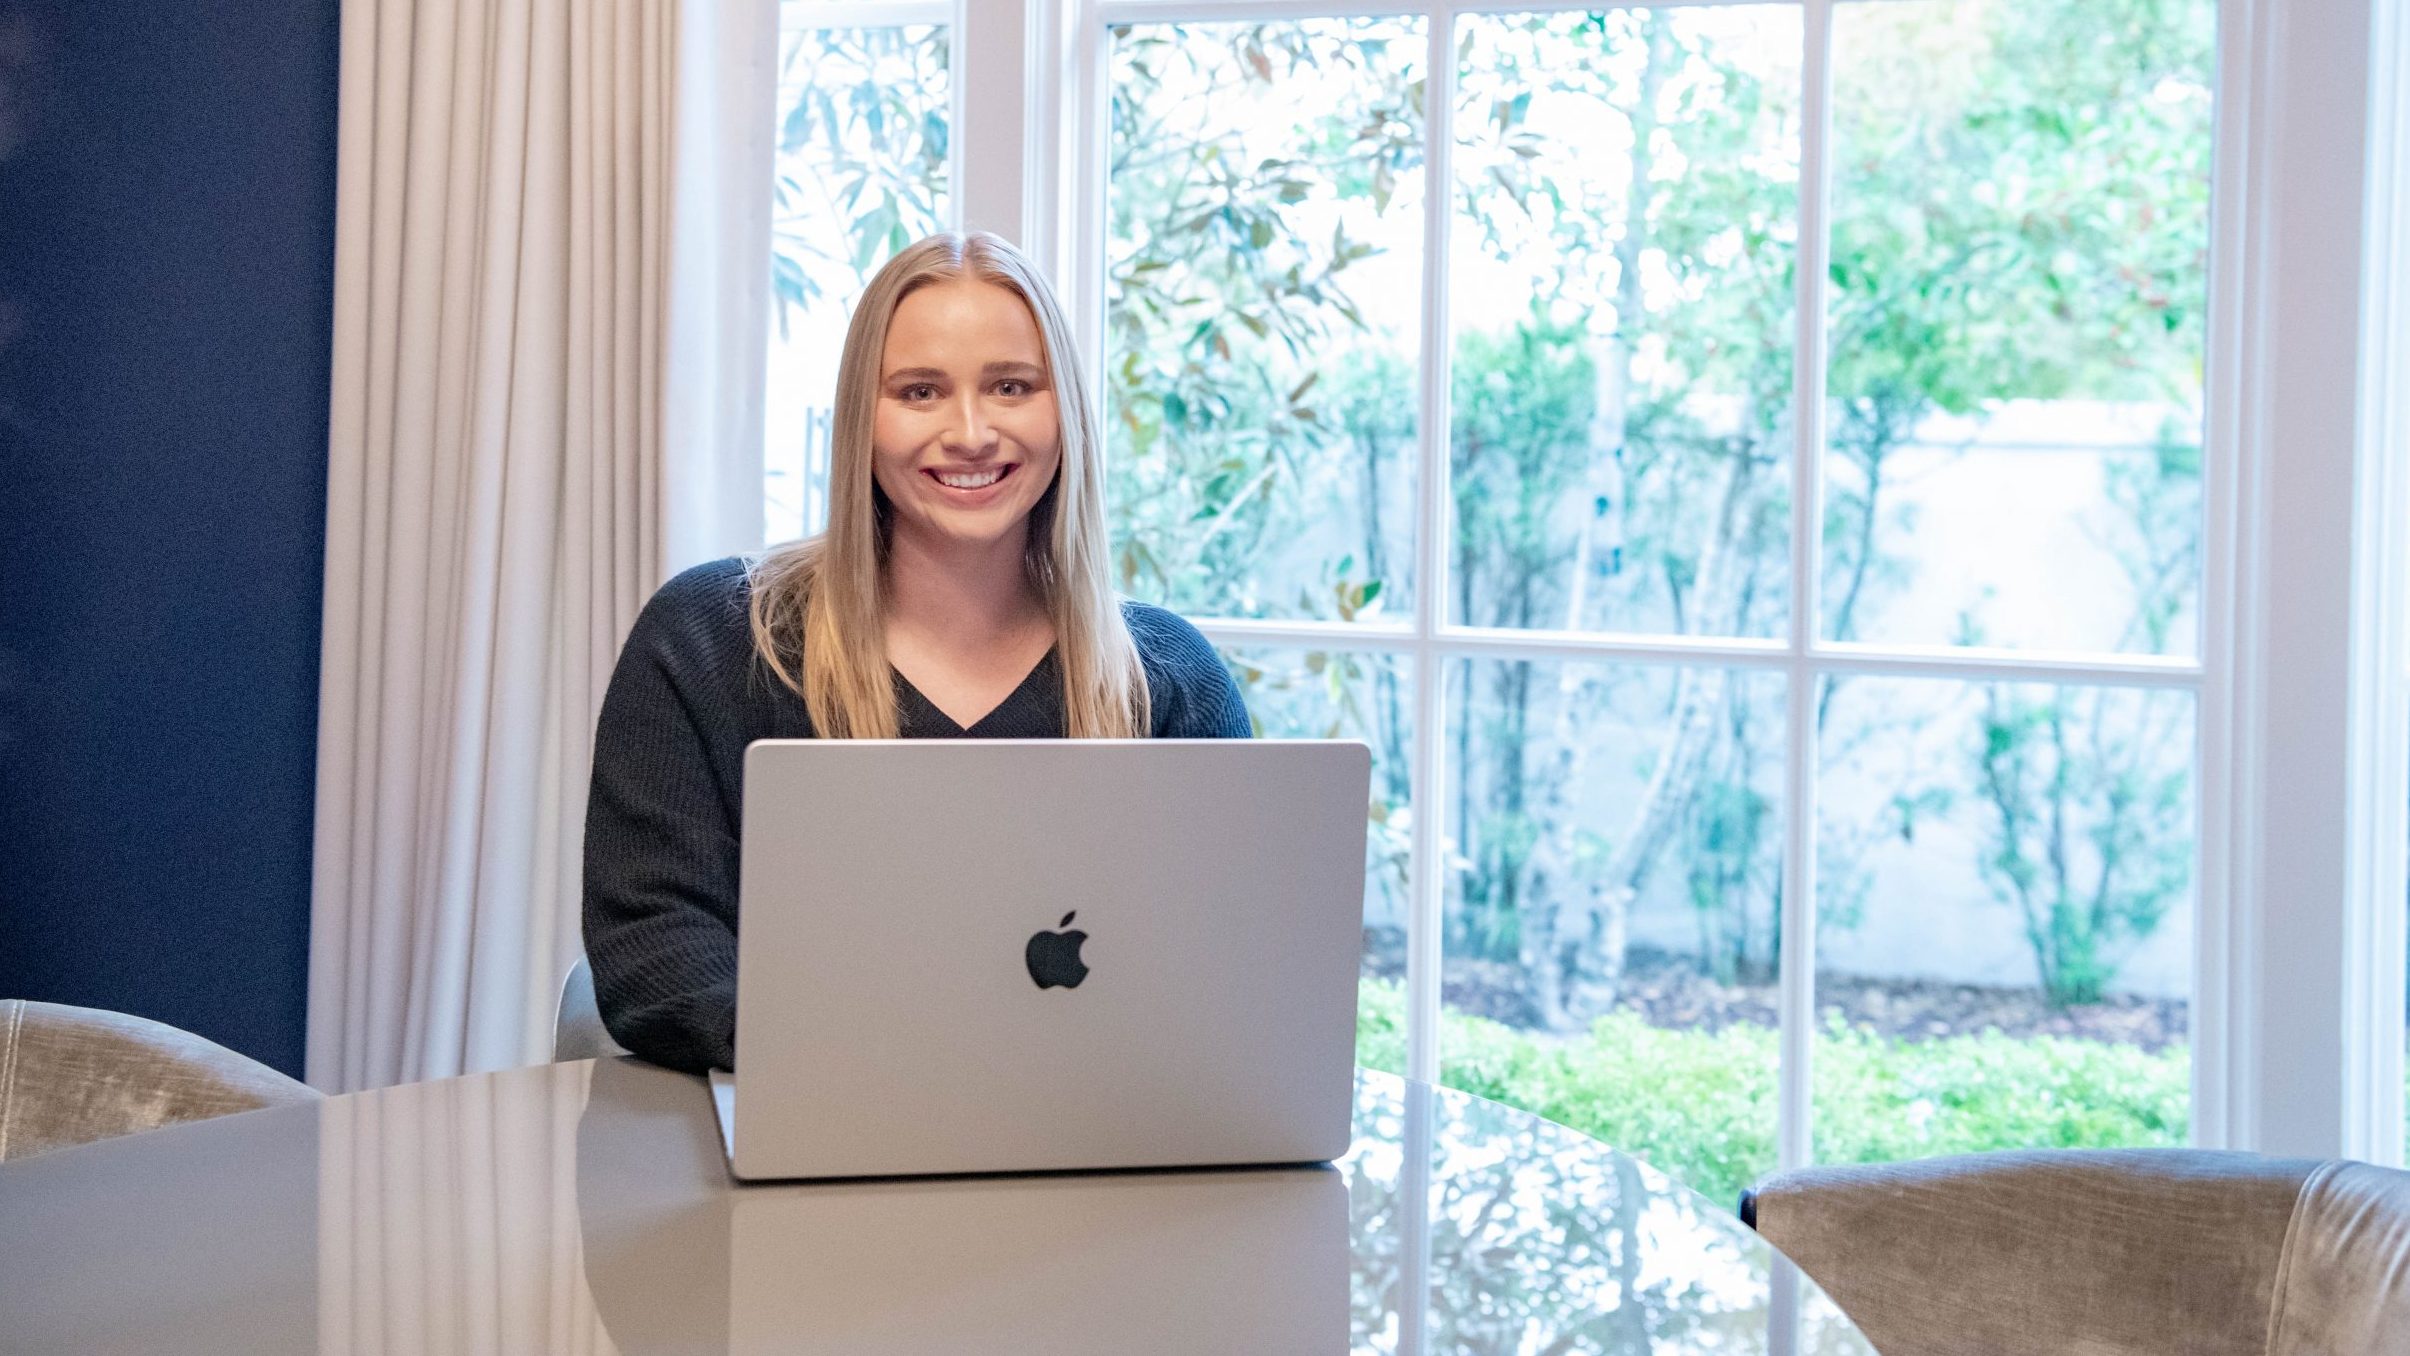 Student sitting at dining room table, with laptop and large window behind her at home.